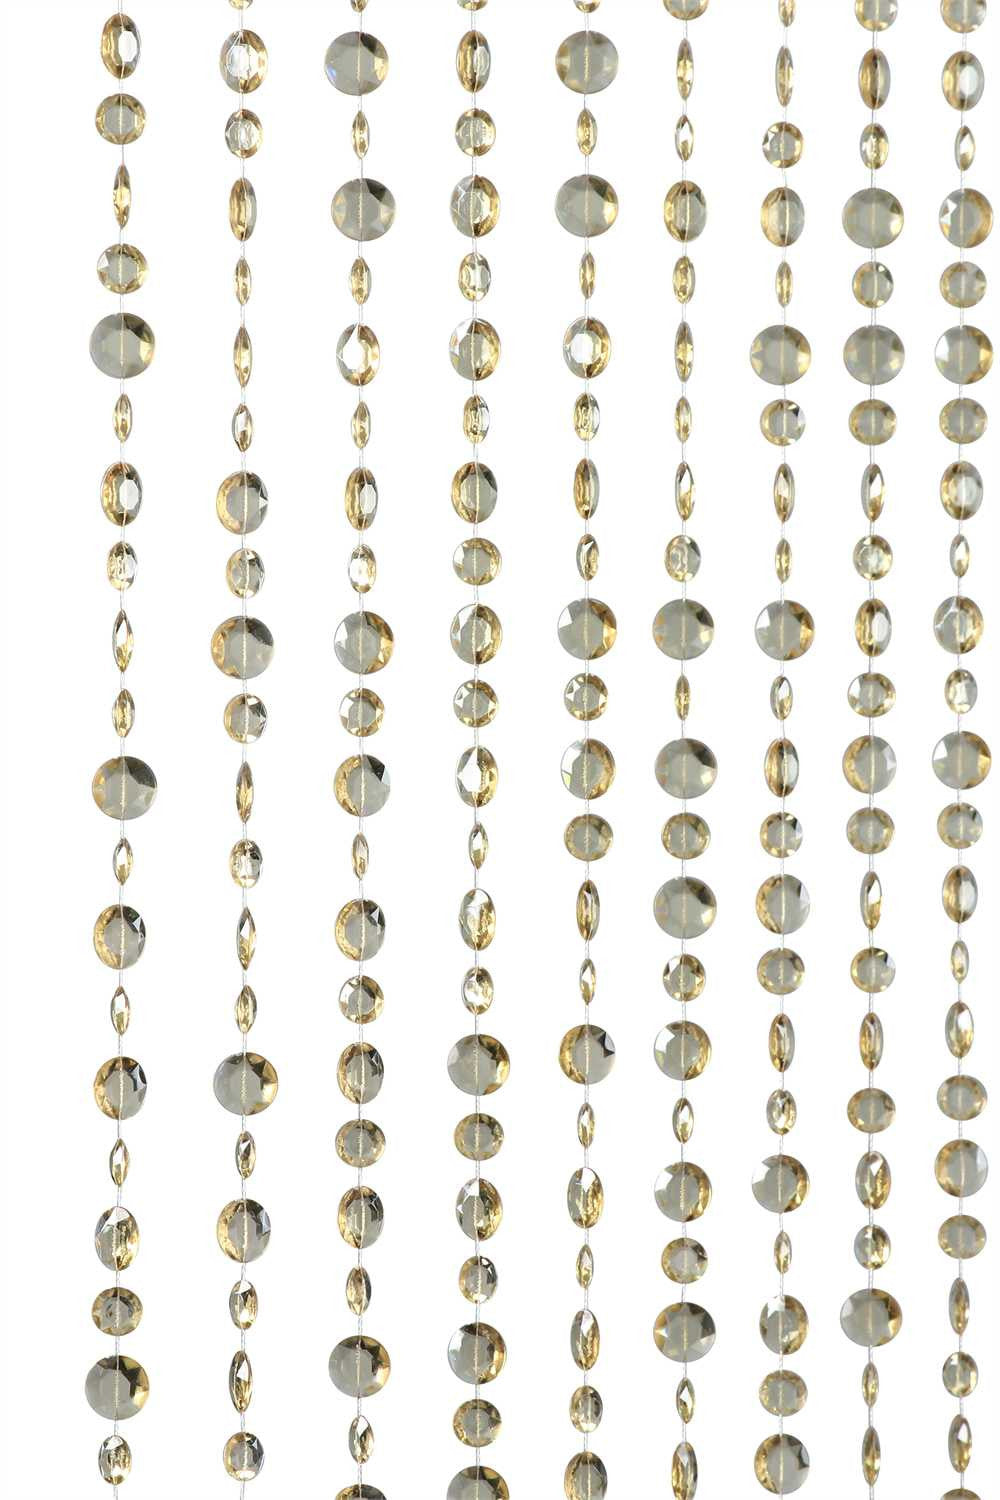 10' Champagne Color Large Diamond Cut Shapes Beaded Curtain